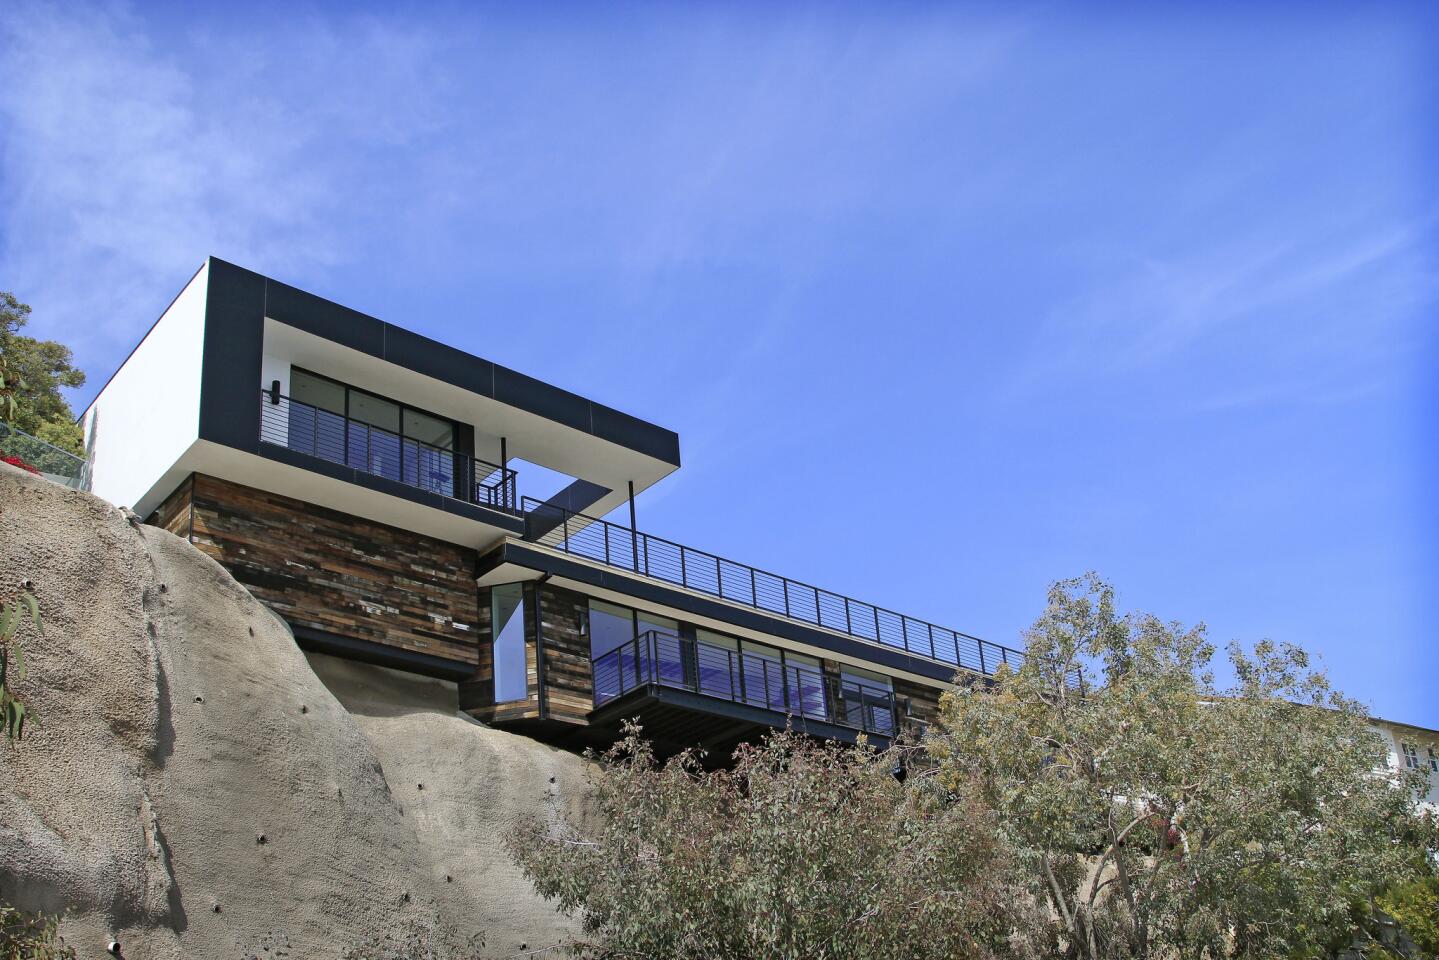 As seen from Malibu's Broad Beach, the house rises as a streamlined structure set atop a rustic base — "a juxtaposition between hard lines and soft lines," W+D founding partner Brett Woods says. "Pure geometry coming off this rugged hillside."